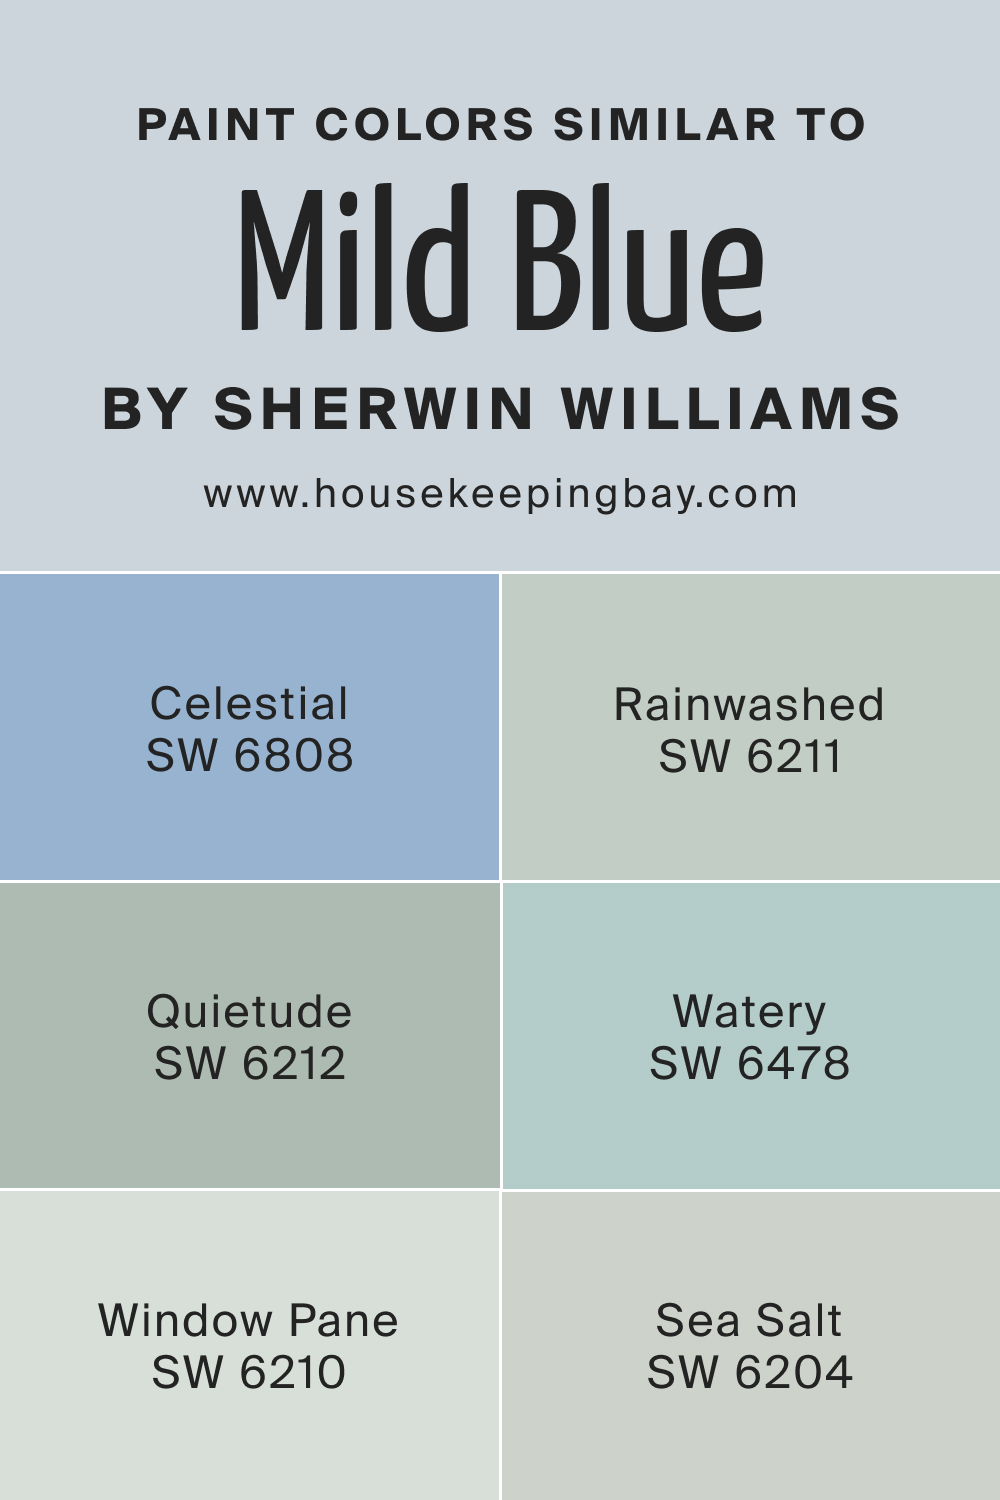 Similar Colors That Can Be Used Instead of SW Mild Blue